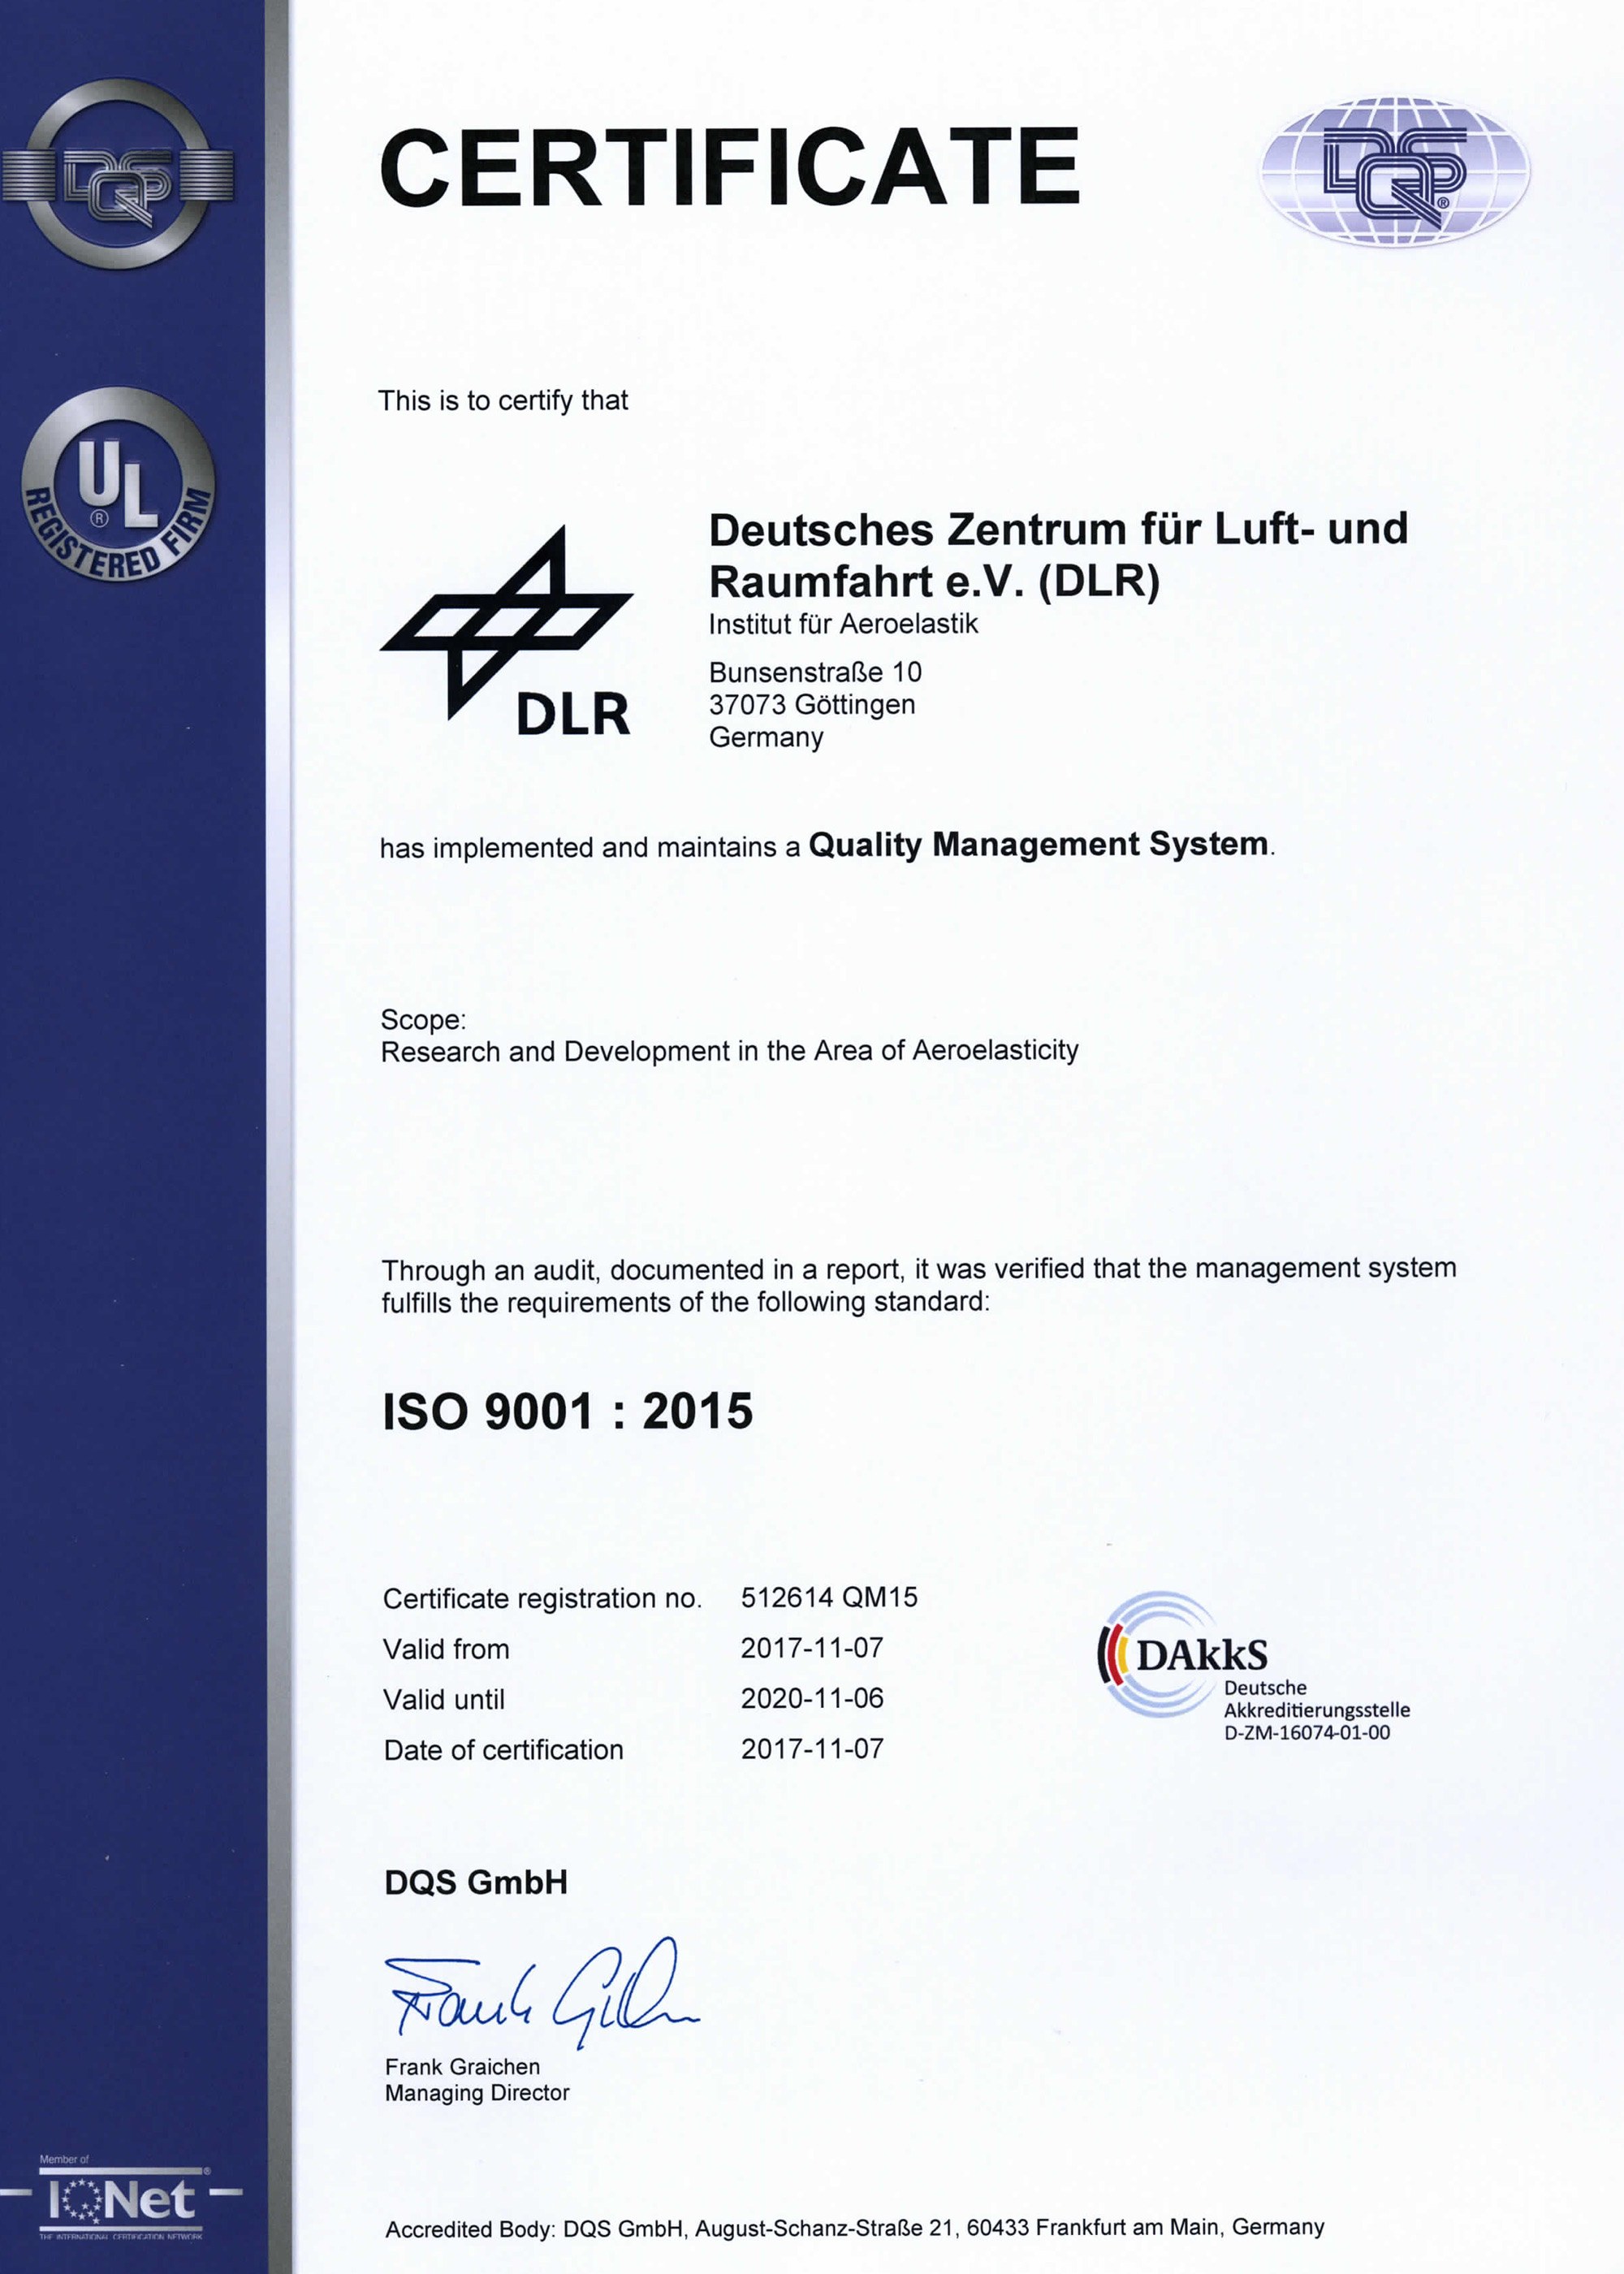 DLR's Institute of Aeroelasticity received a Quality Management System certificate from DQS